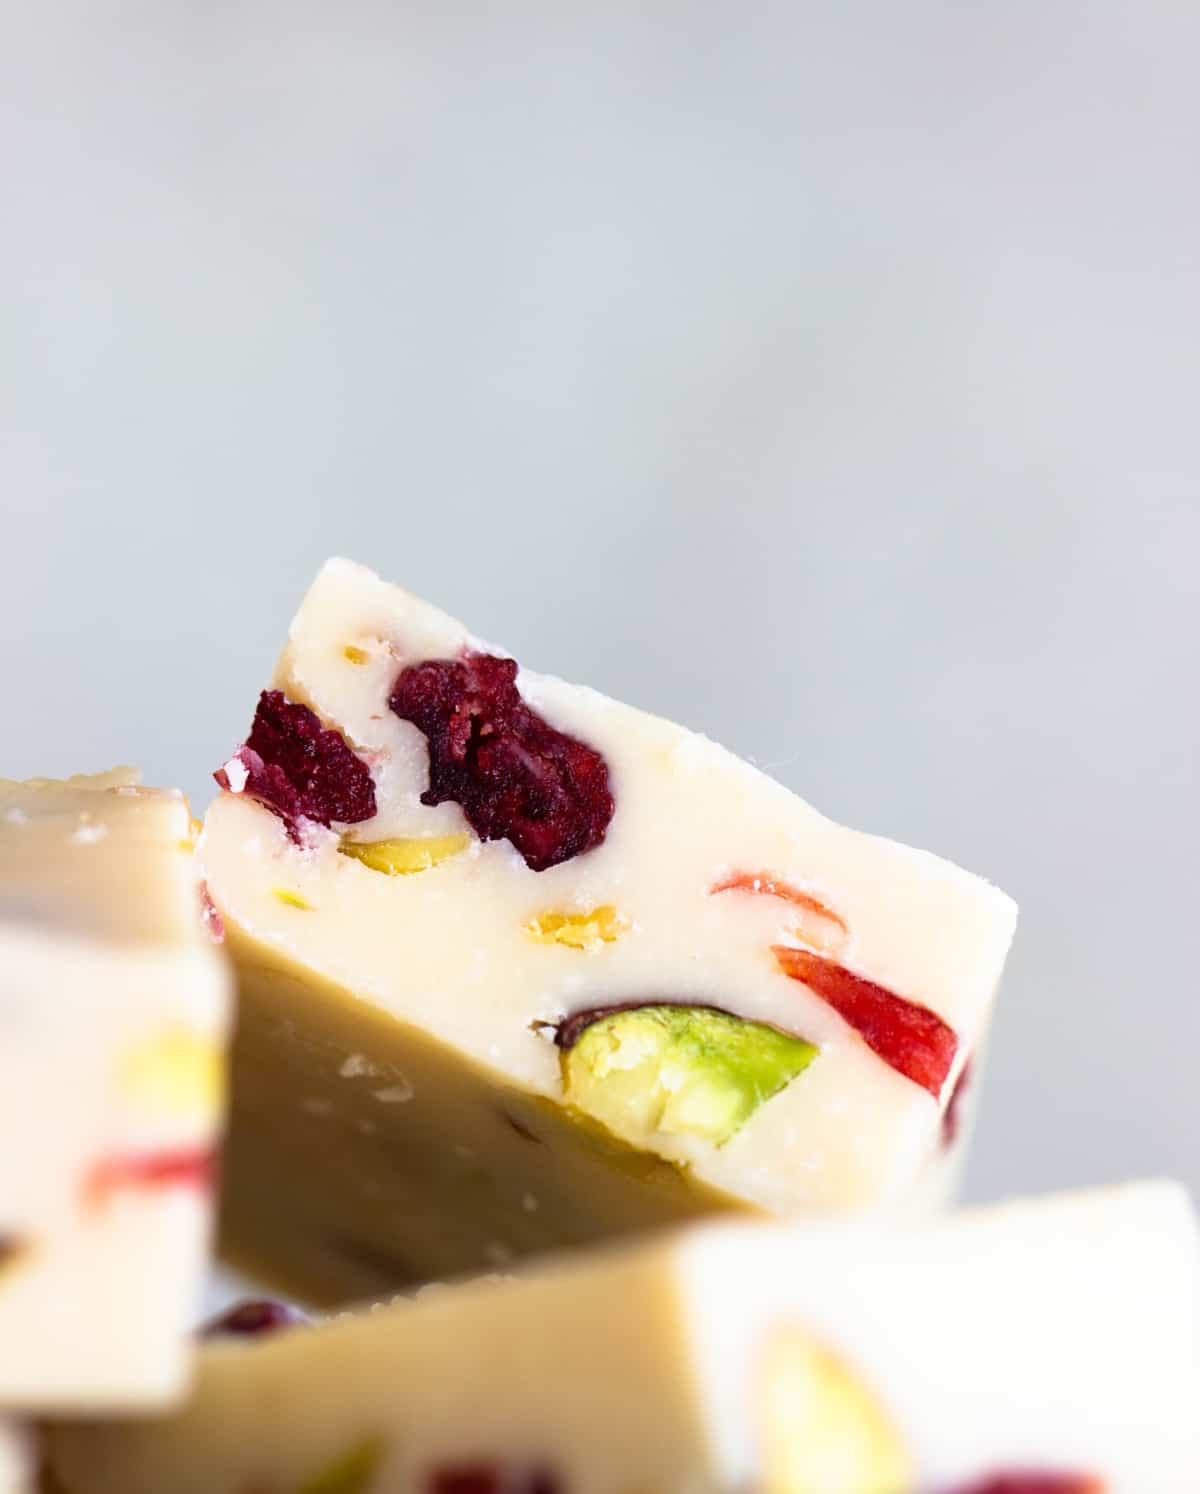 Close-up image of piece of white fudge with cranberries and pistachios, grey background